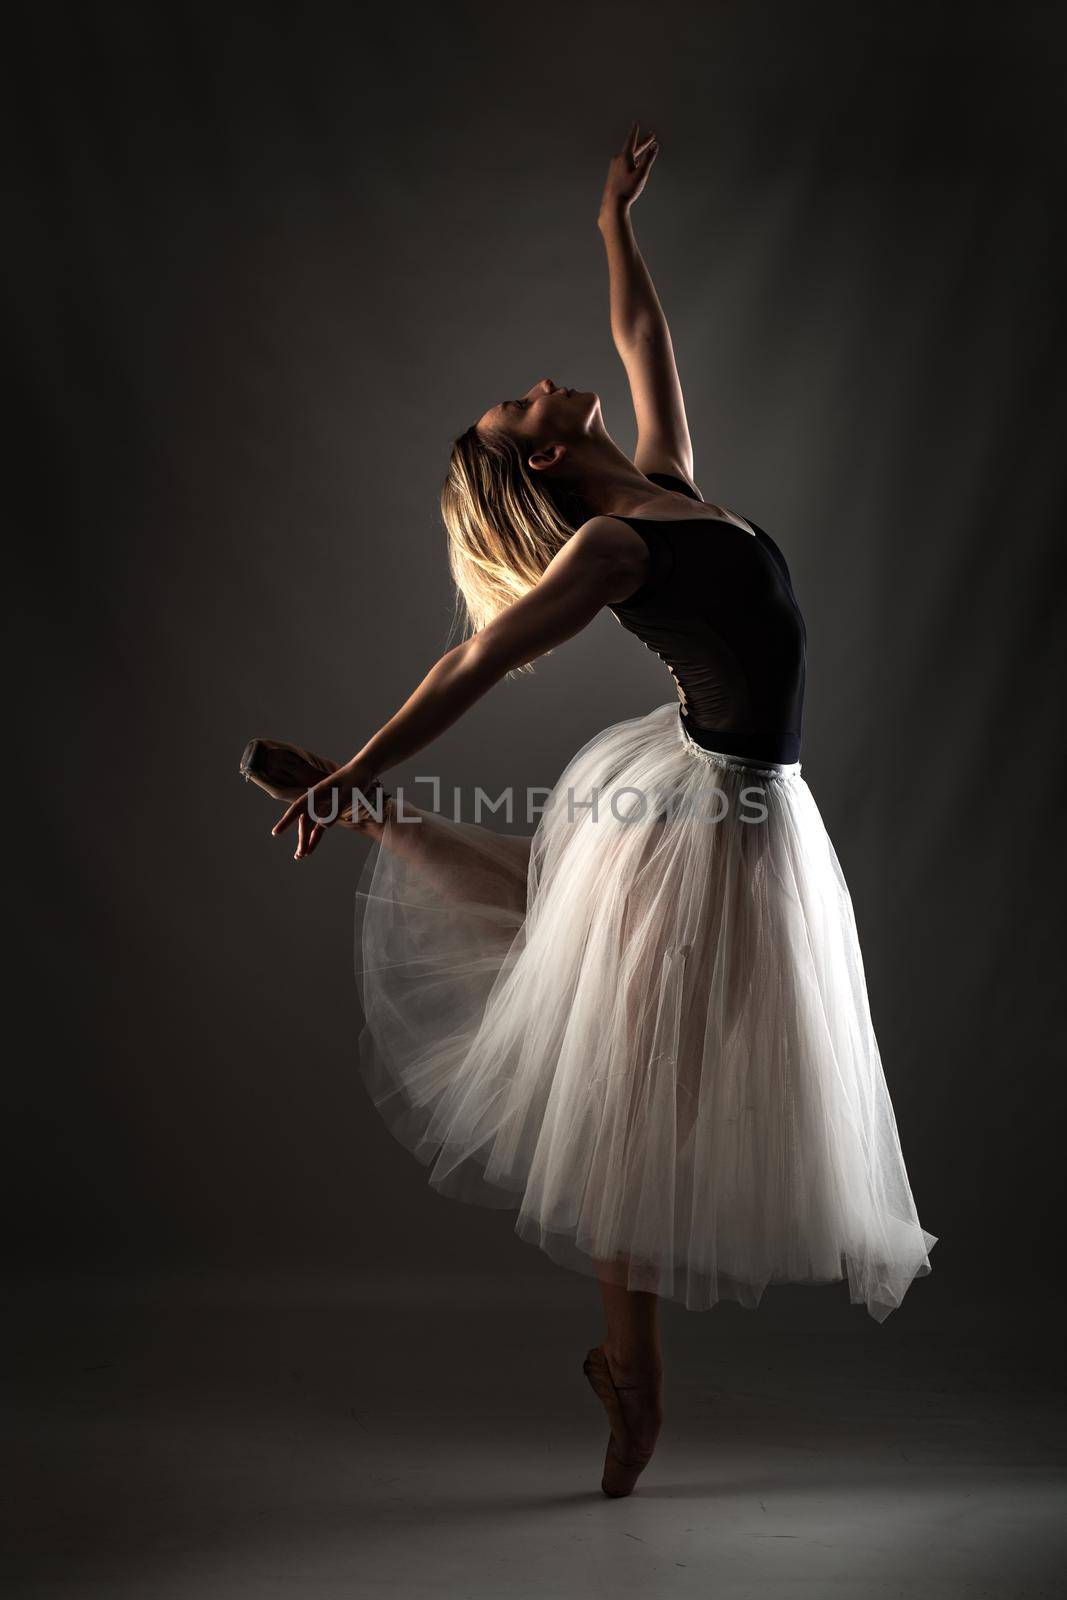 ballerina with a white dress and black top posing on gray background. by kokimk